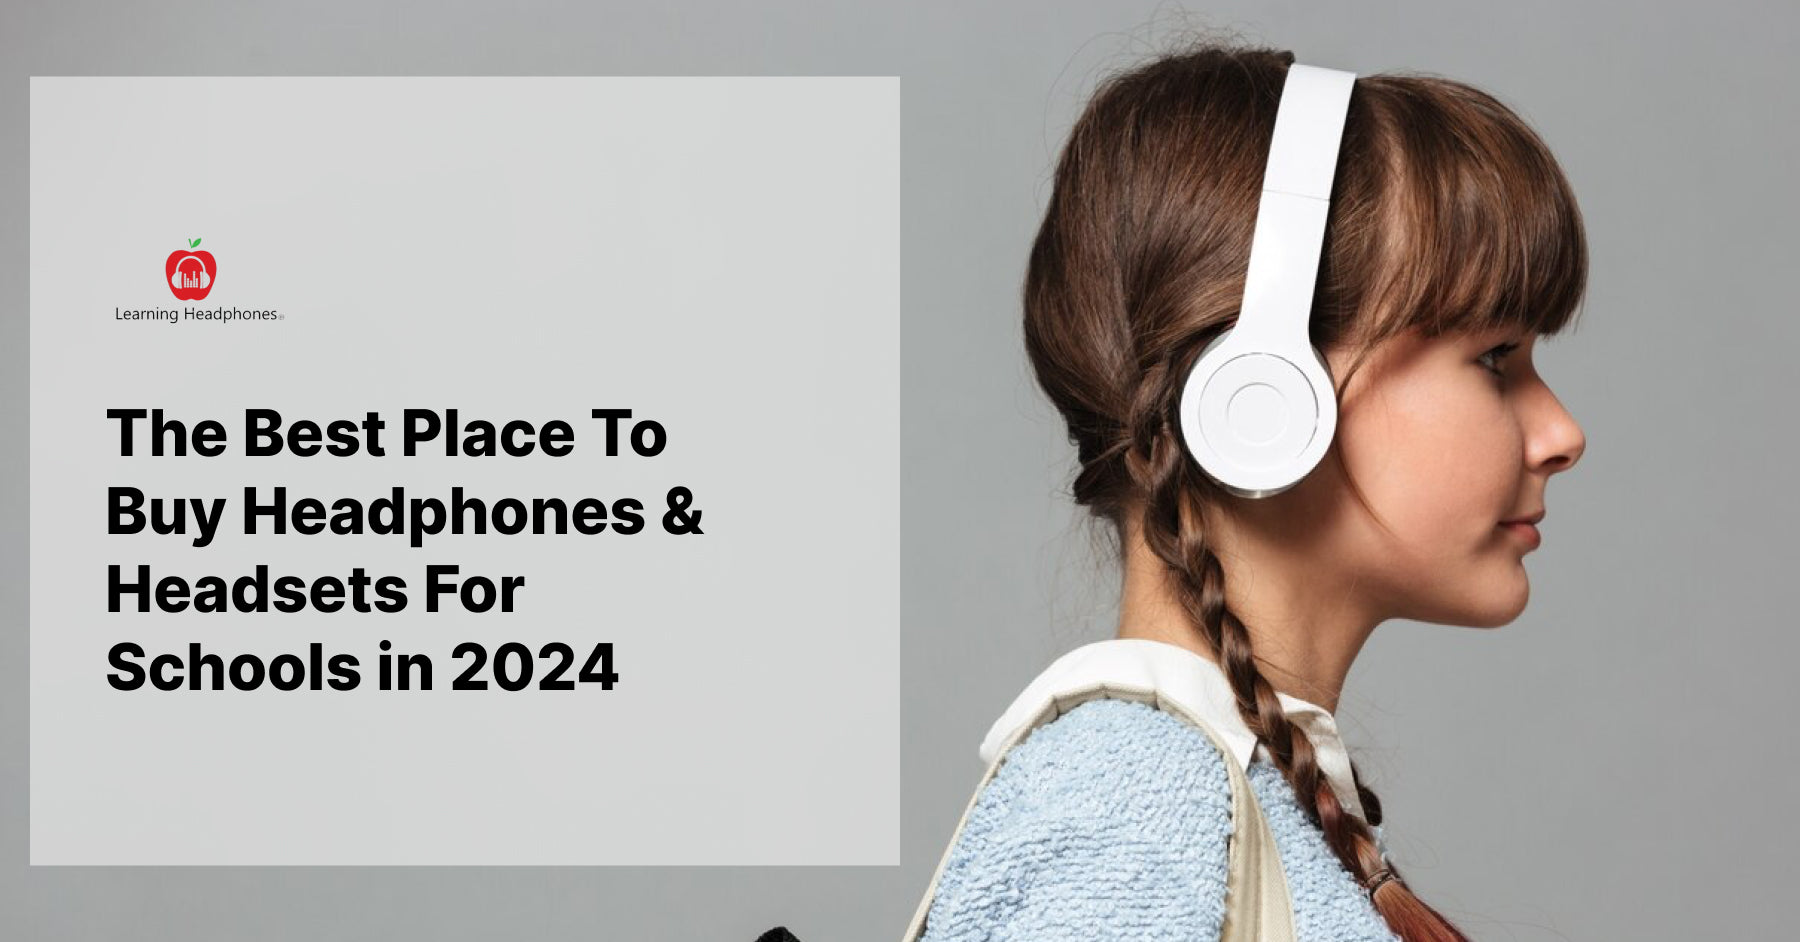 The Best Place To Buy Headphones & Headsets For Schools in 2024